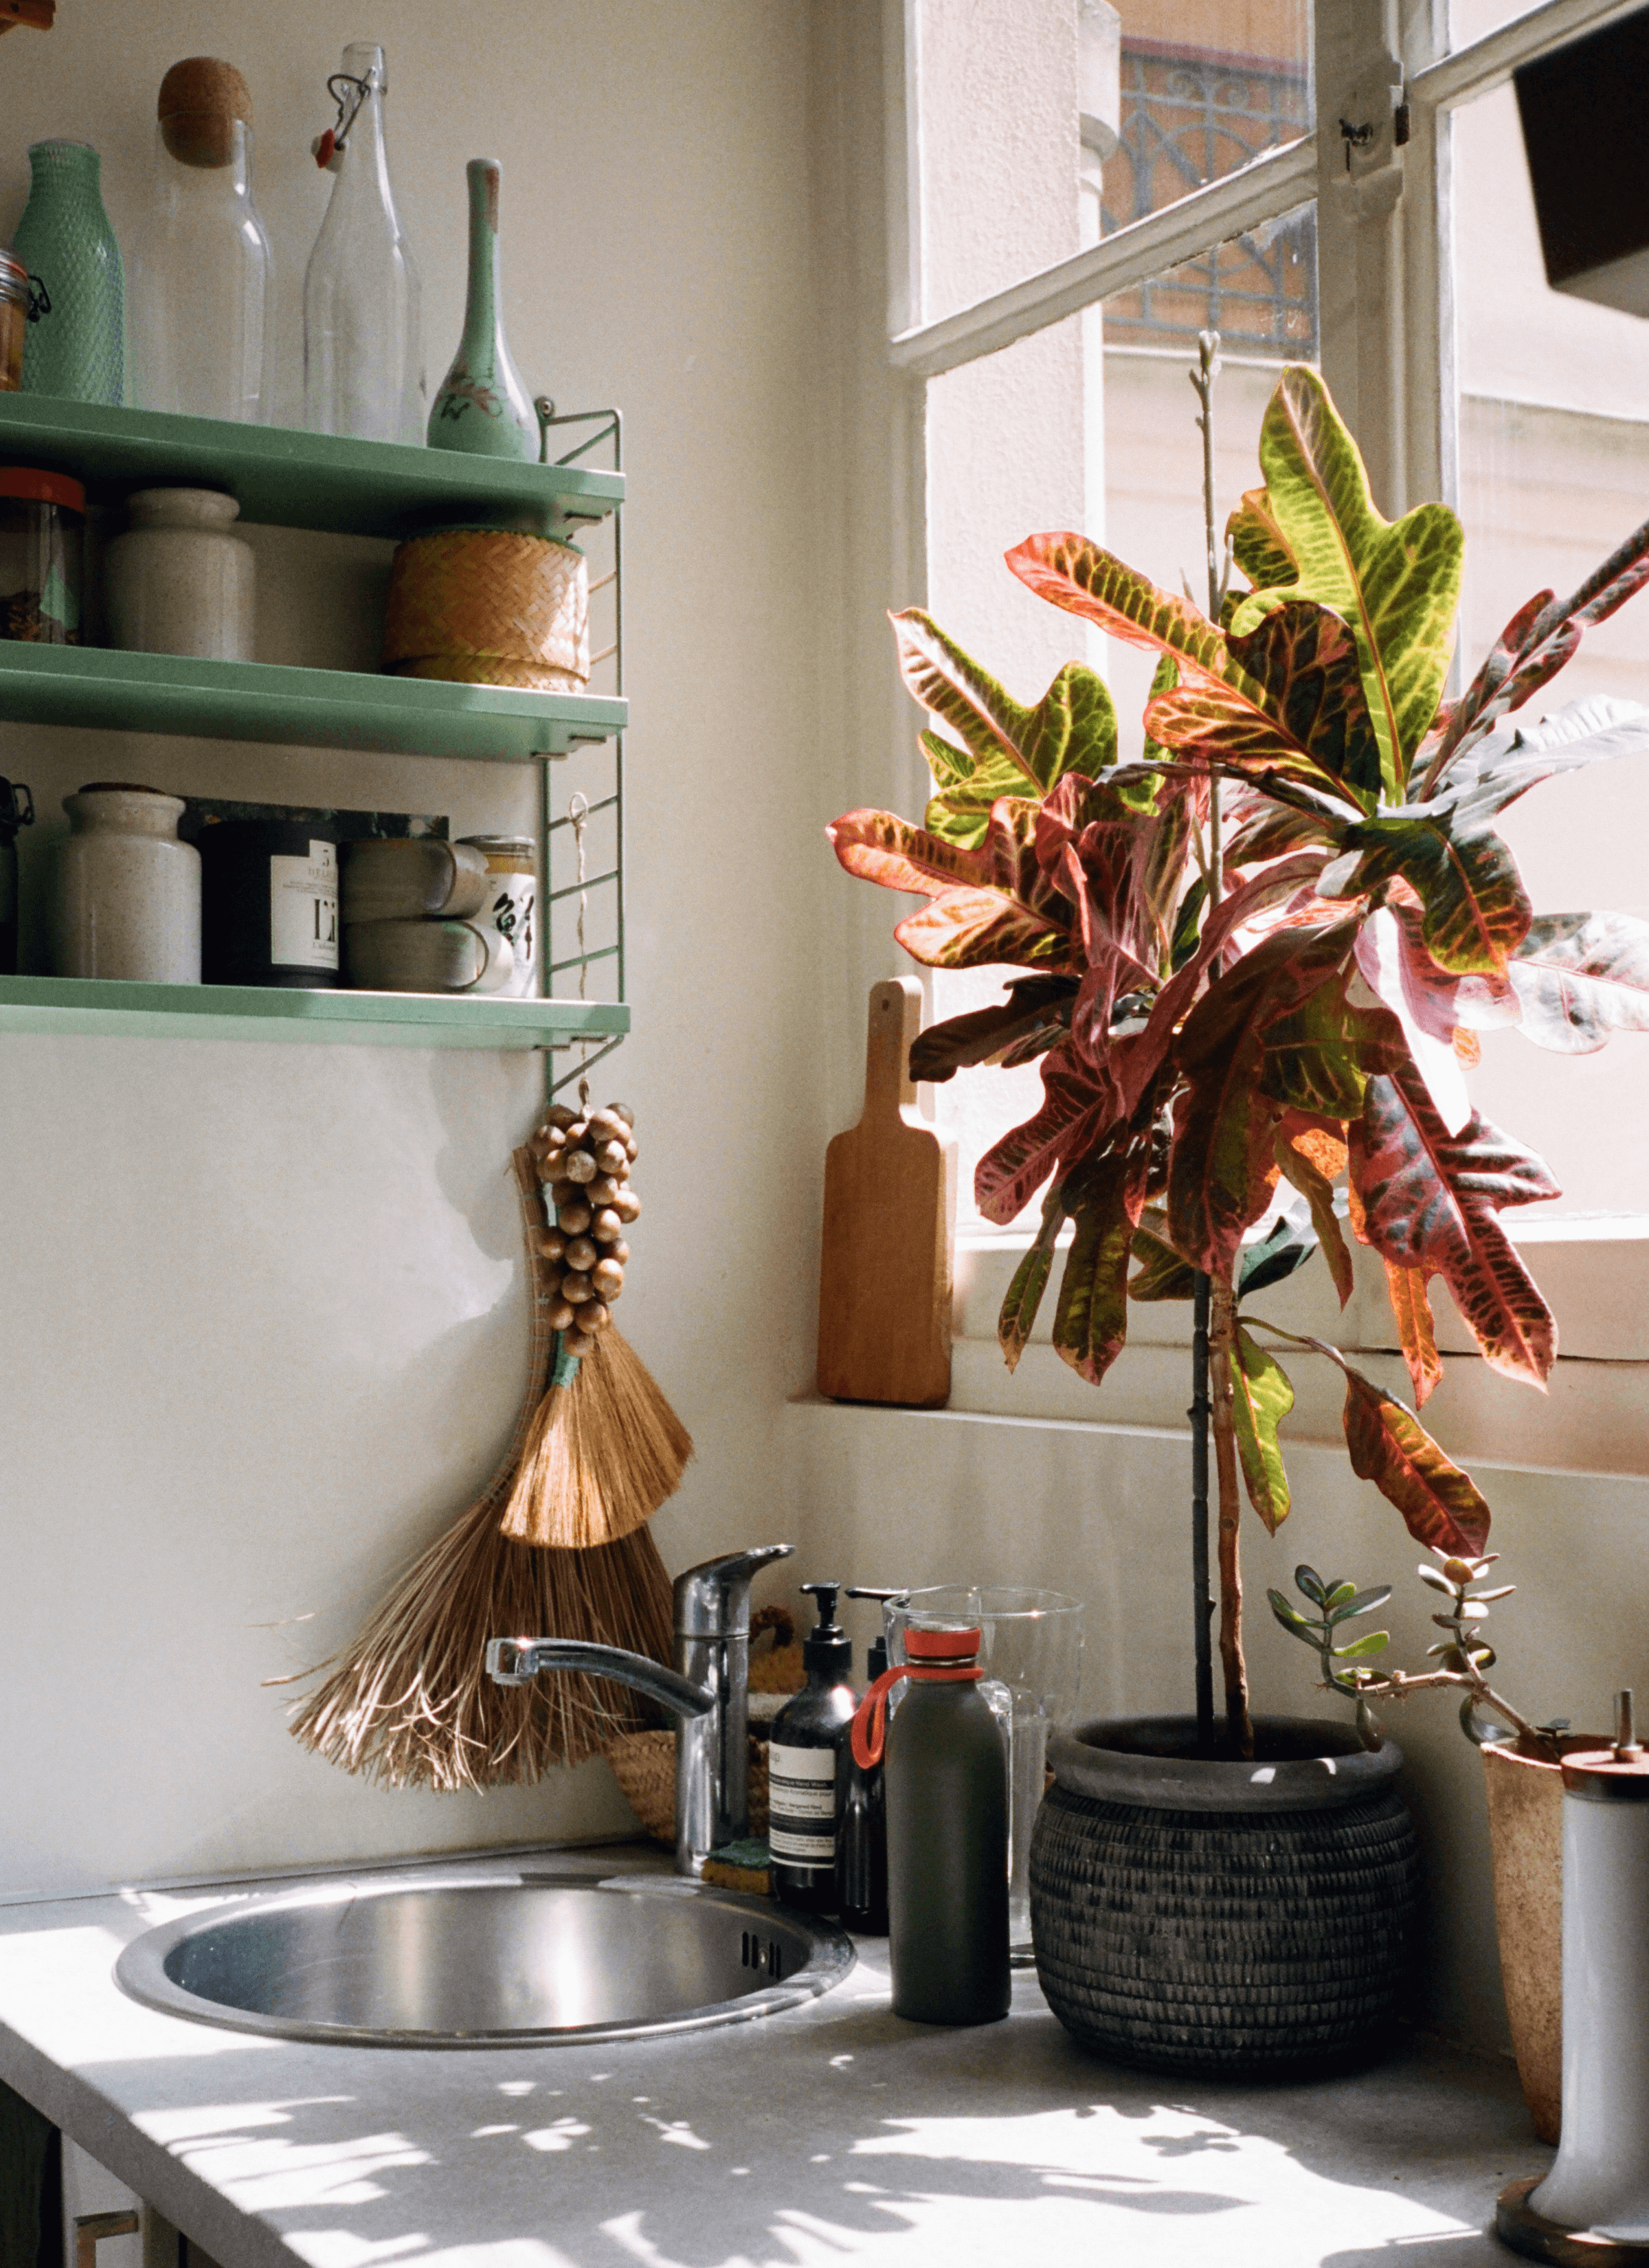 Glassware, ceramic bottles, and cups on the shelf that hung on the wall next to the kitchen sink. And a potted plant with red and green leaves next to the window.